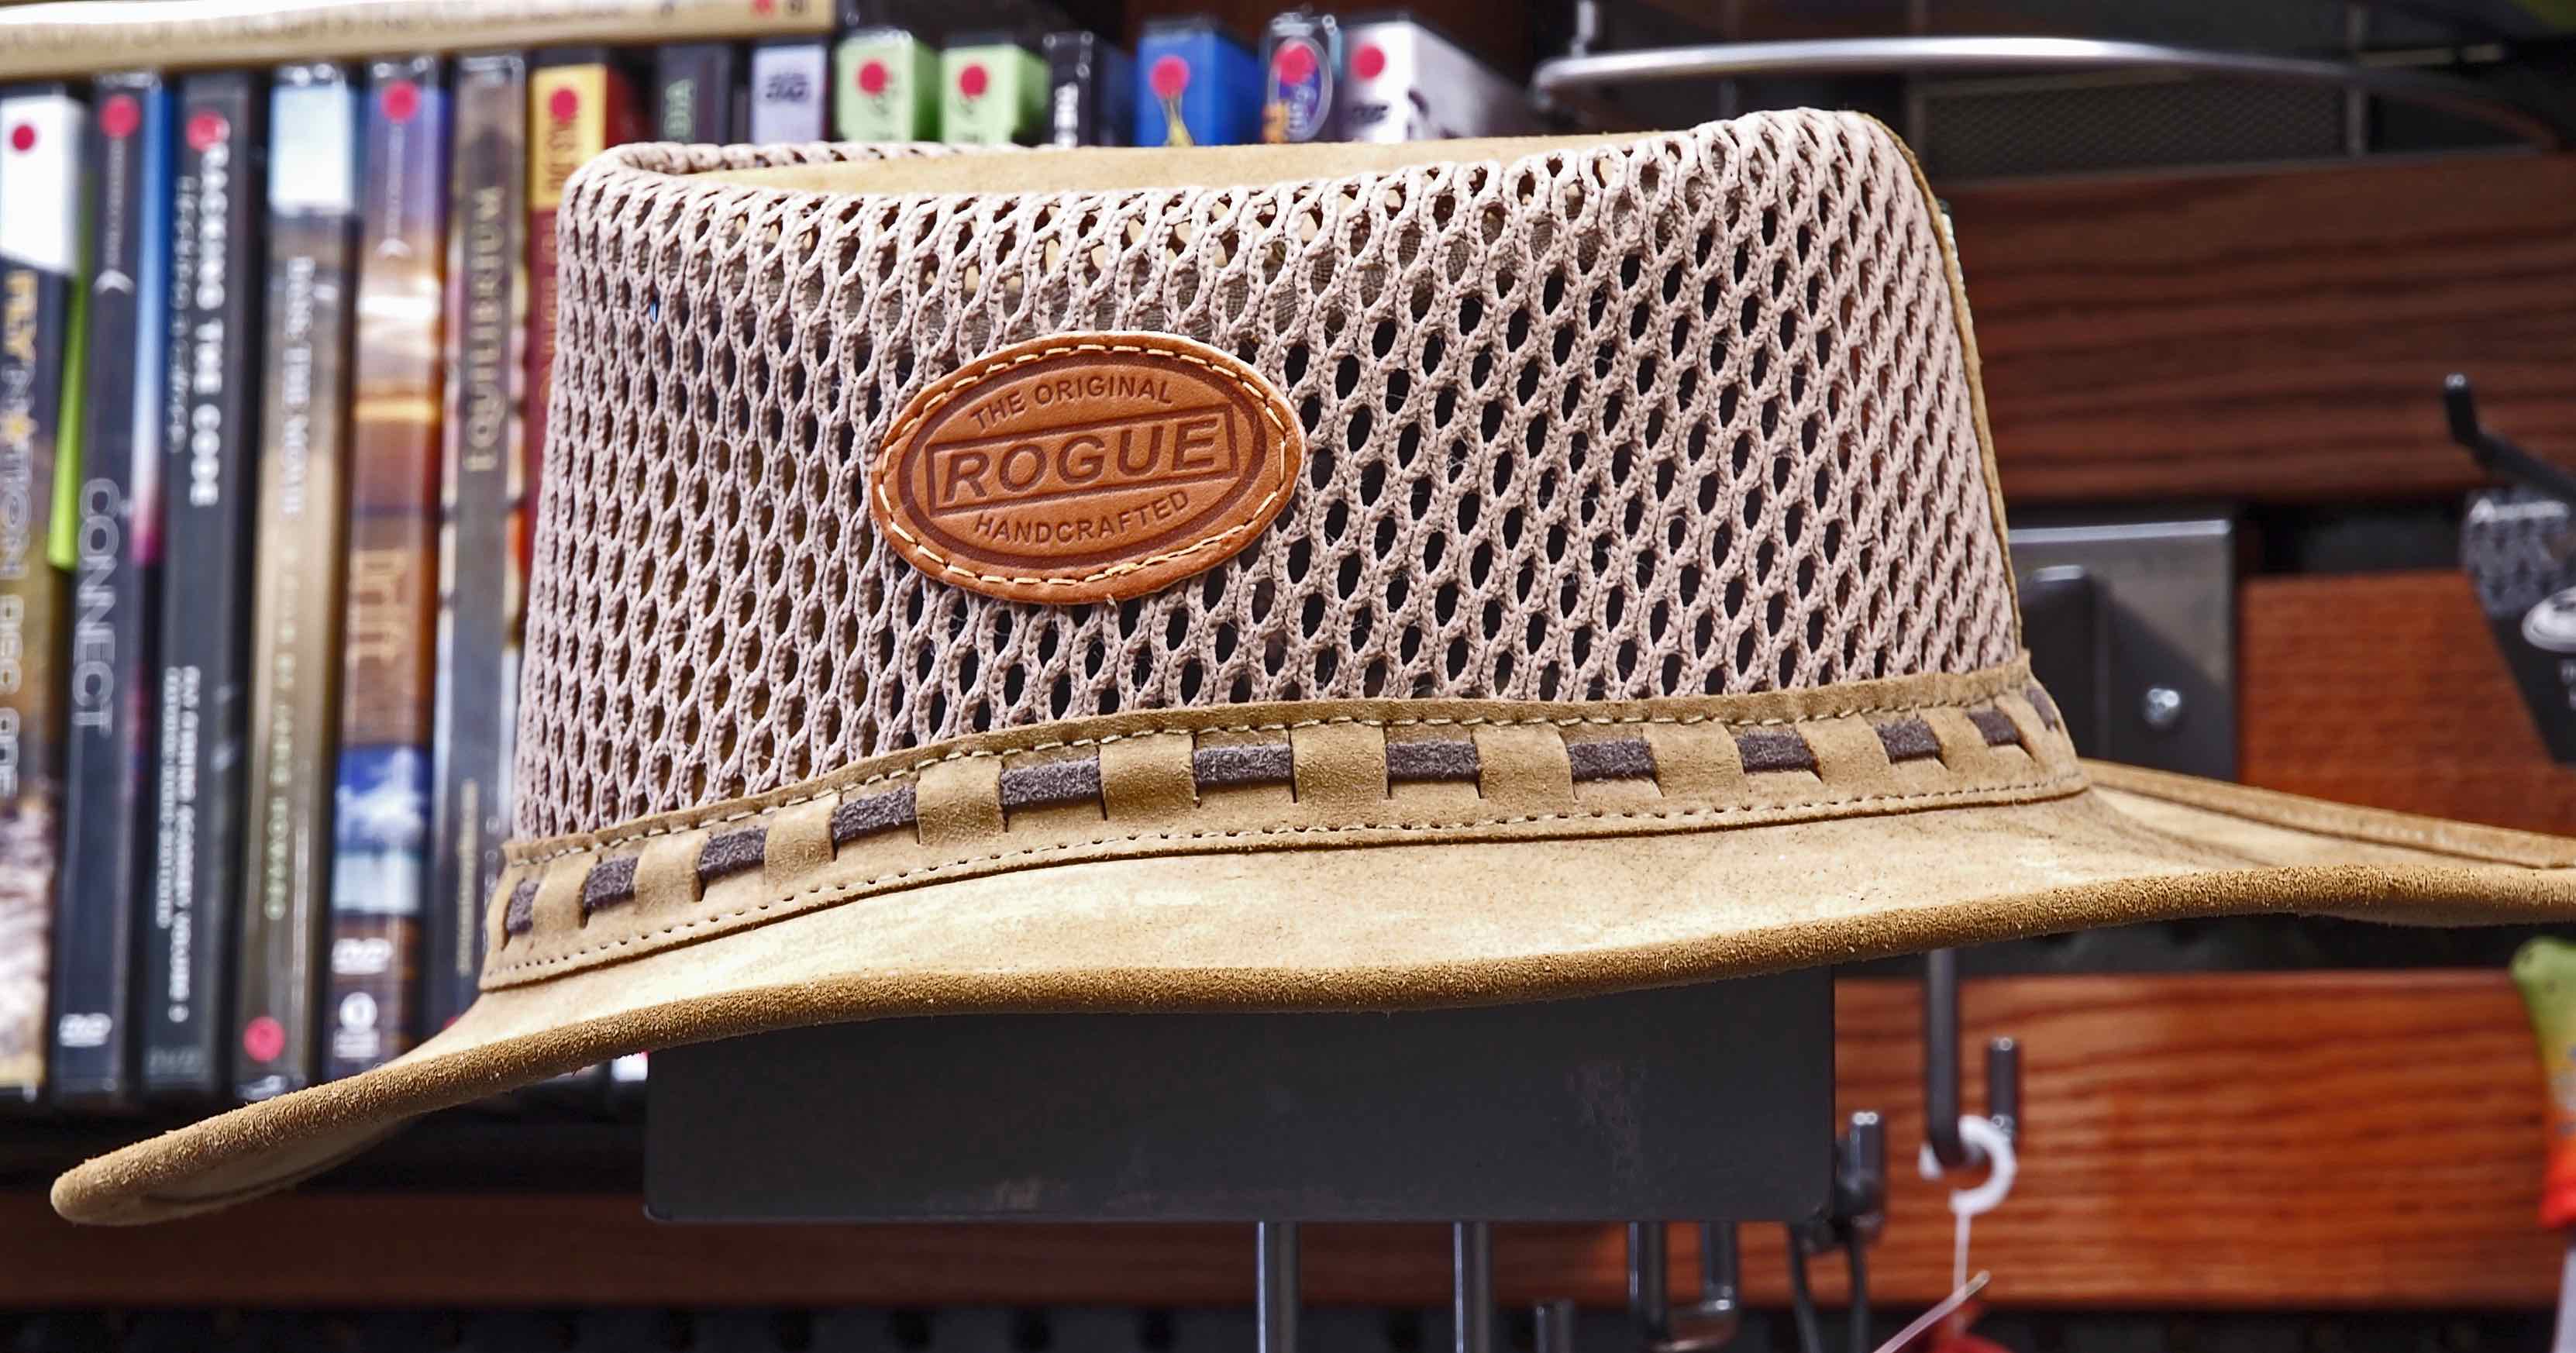 Barmah Foldaway Leather Hat - Herbert's Boots and Western Wear